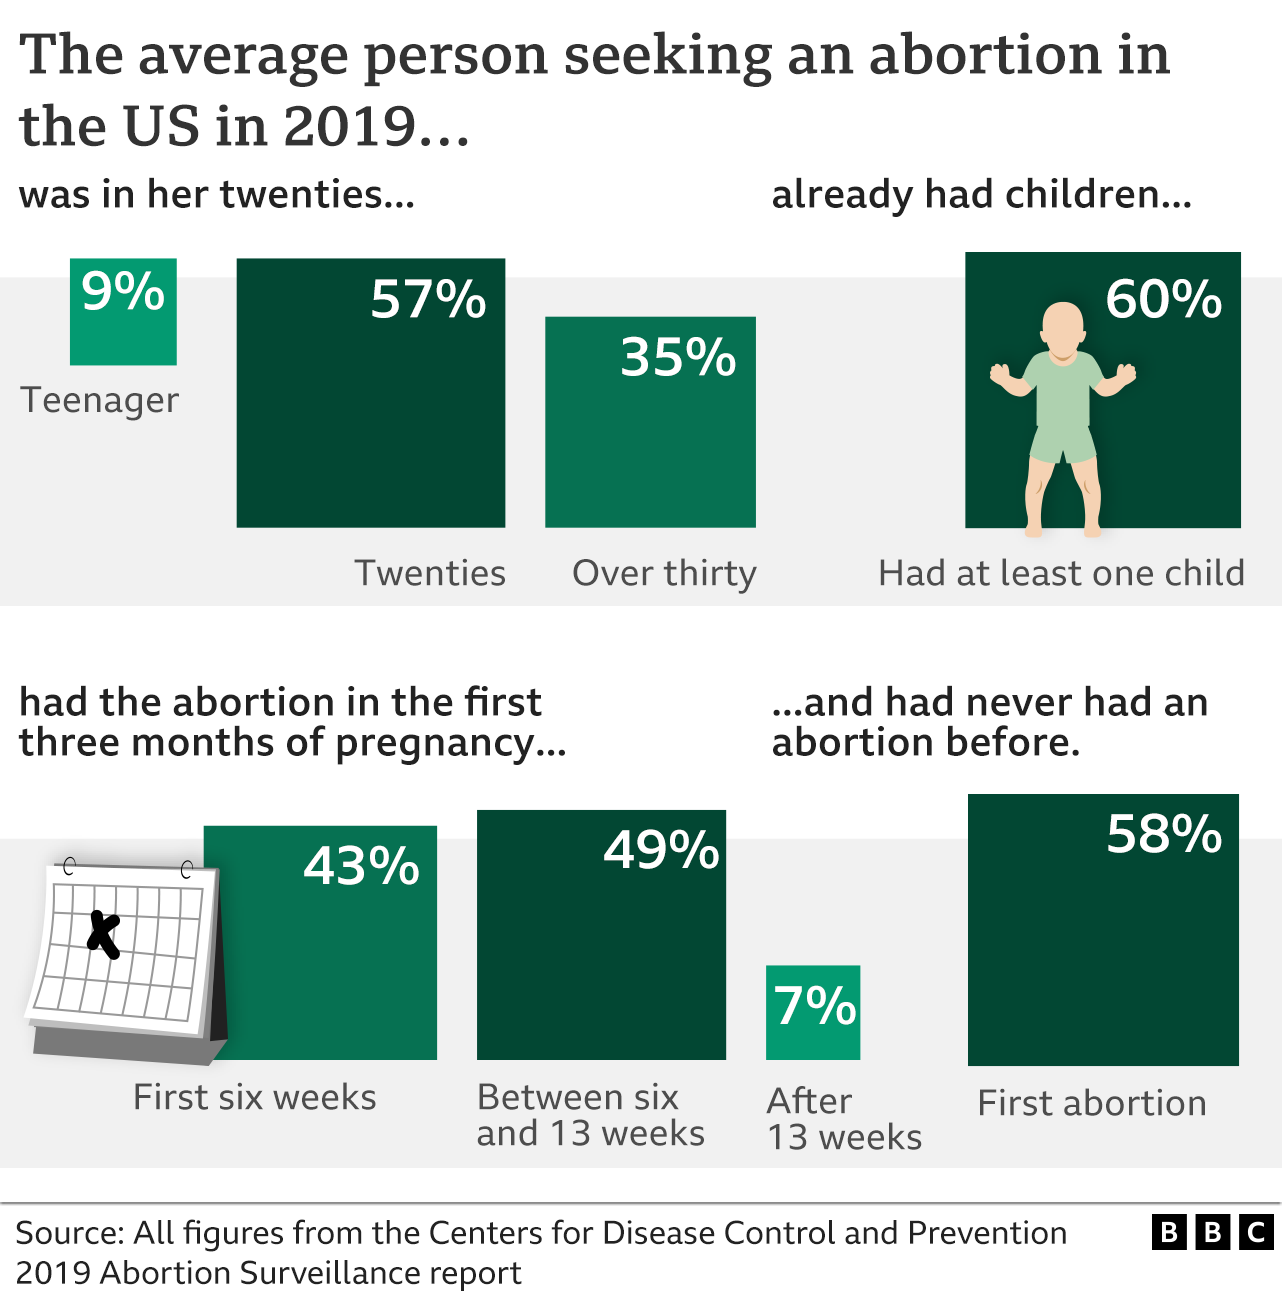 Graphic showing that, according to the CDC Abortion Surveillance Report 2019, women getting abortions are most likely to be in their twenties(57%), already have at least one child (60%), be seeking an abortion in the first three months of their pregnancy (49%) and having their first abortion (58%)